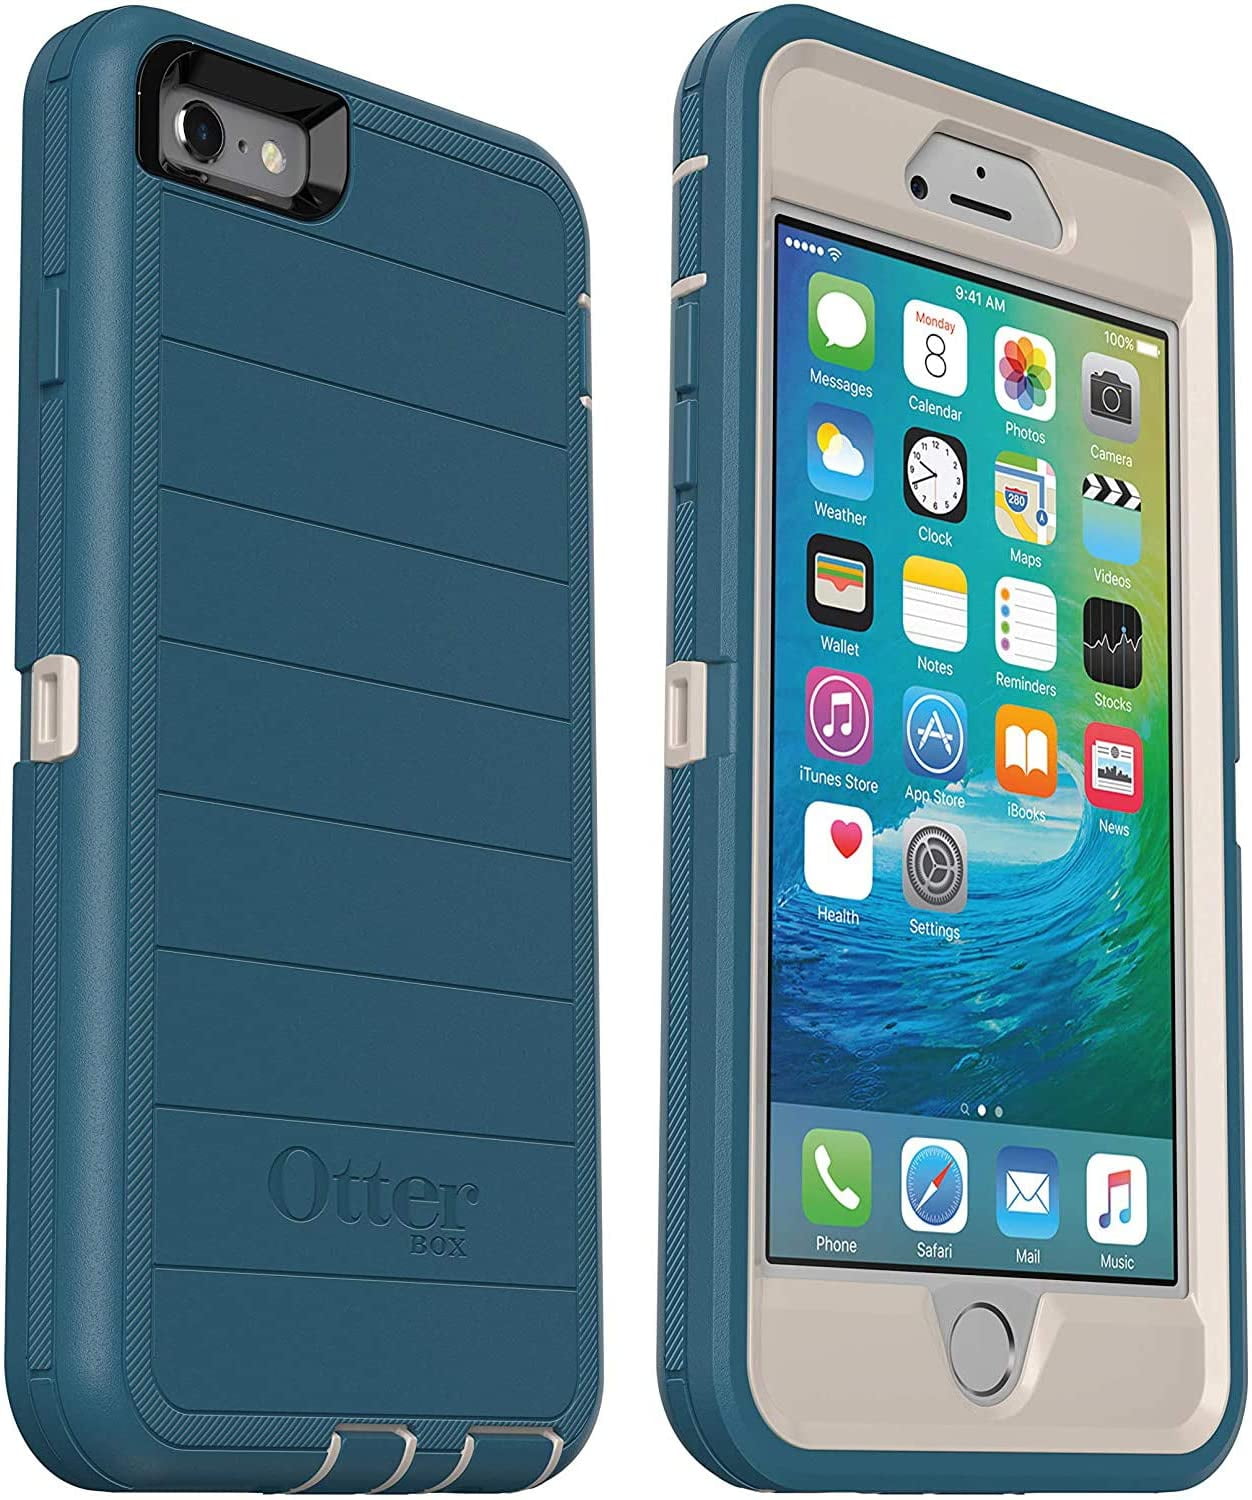 OtterBox Defender Series Rugged Case for iPhone 6s & 6, Big Sur